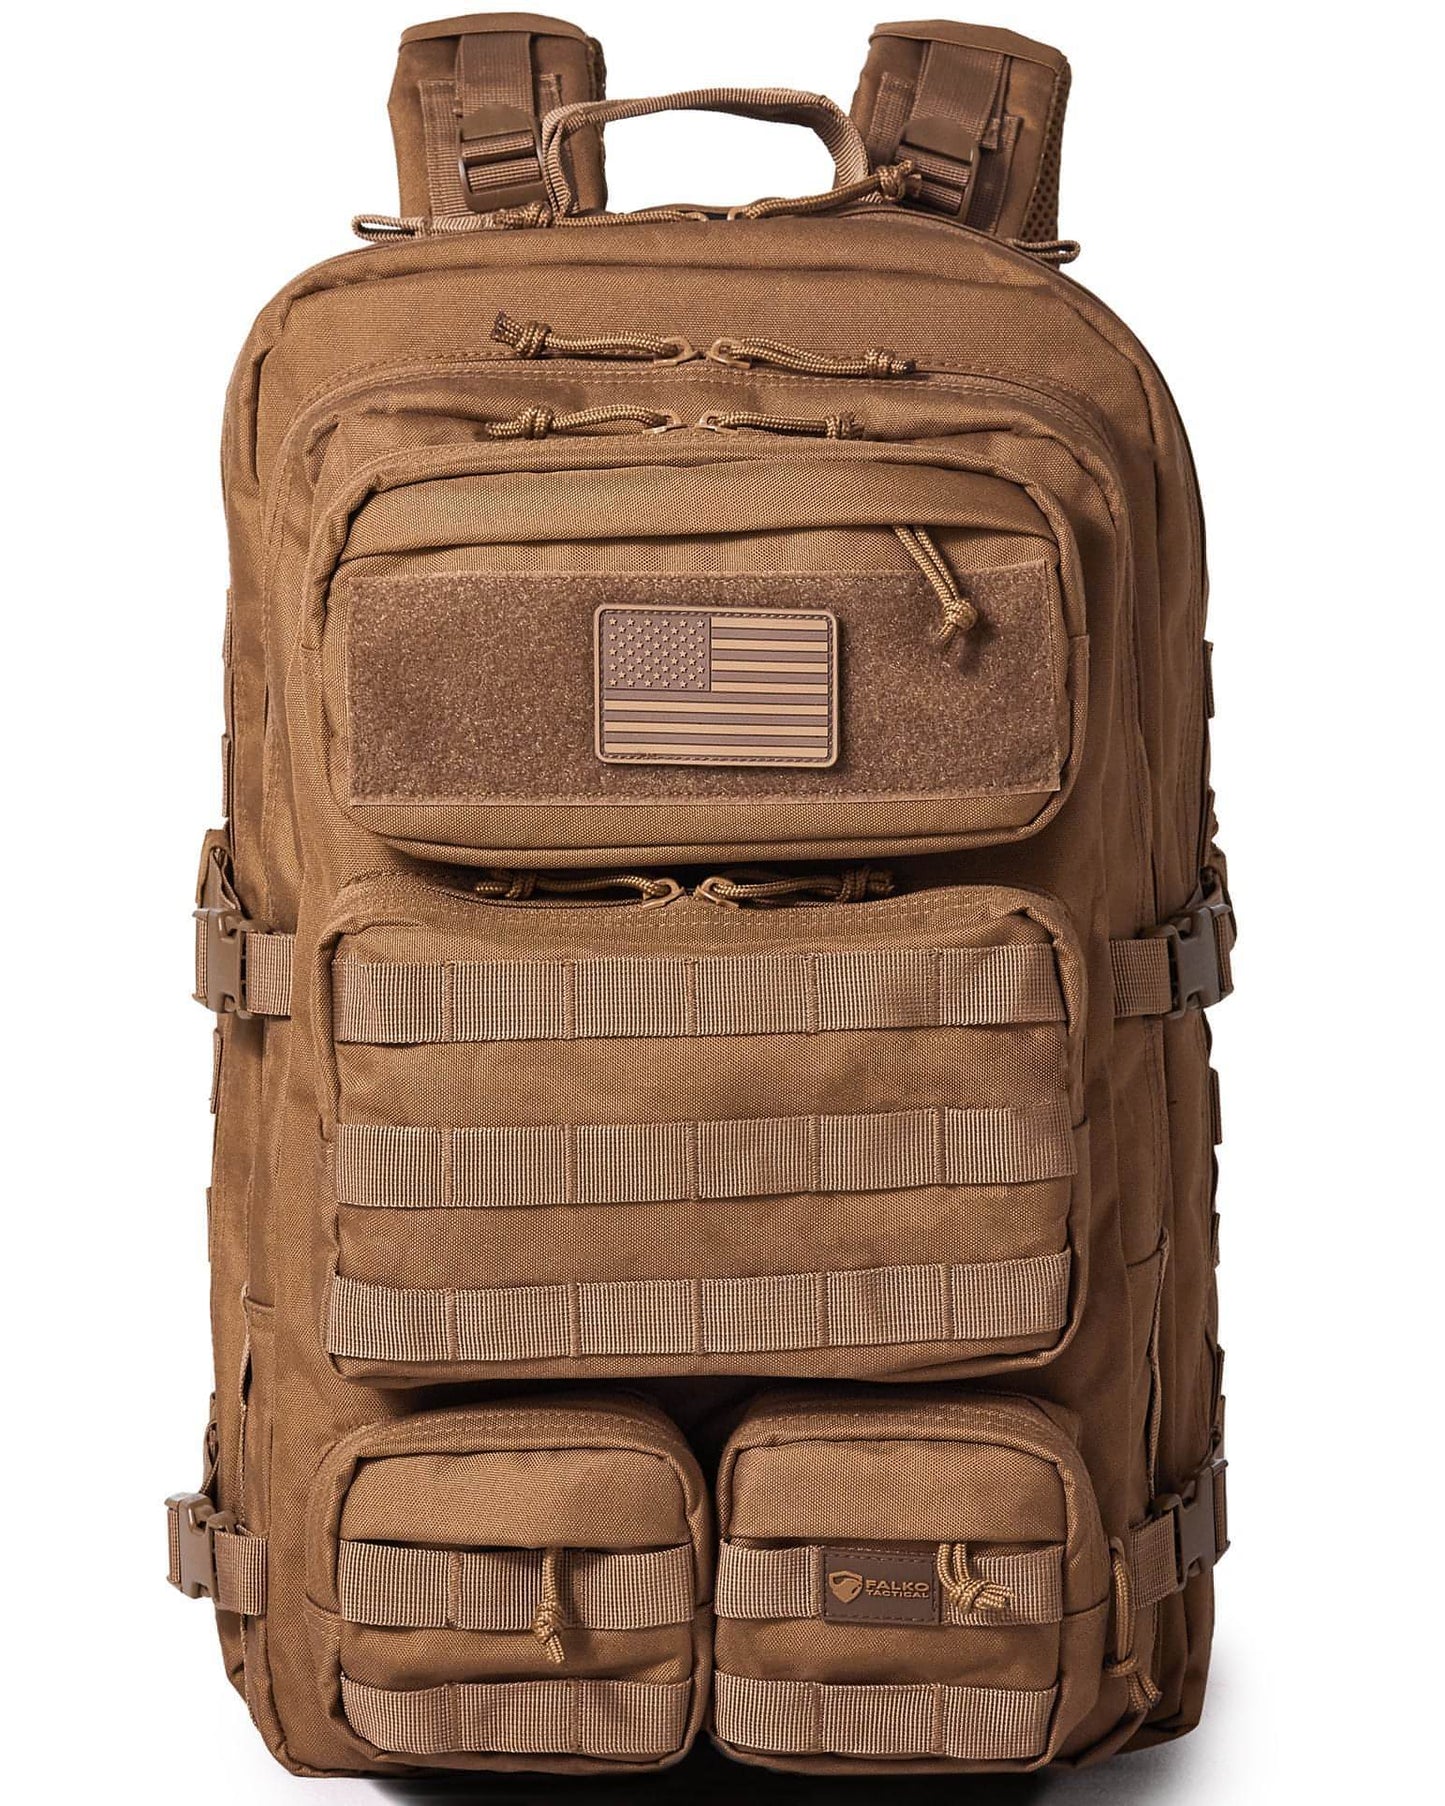 APT2.0  3-day Tactical Backpack